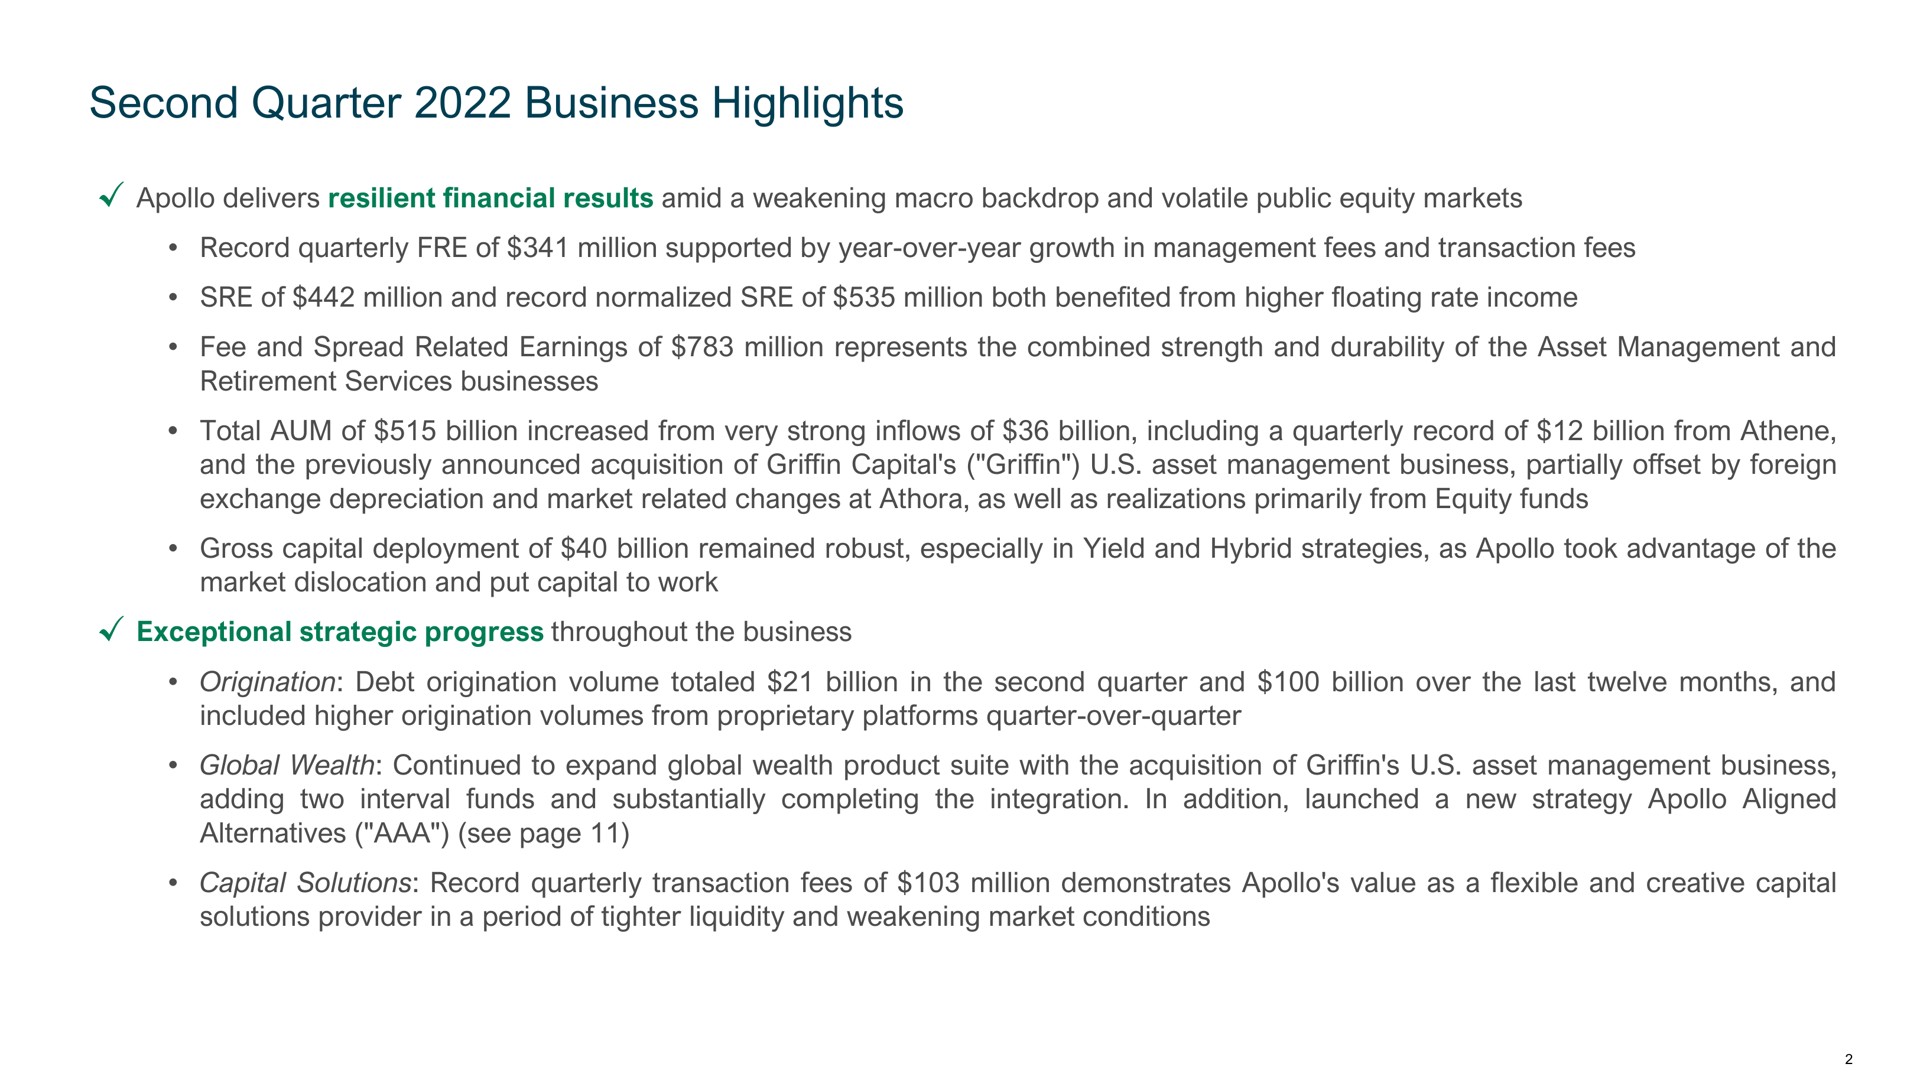 second quarter business highlights delivers resilient financial results amid a weakening macro backdrop and volatile public equity markets record quarterly of million supported by year over year growth in management fees and transaction fees of million and record normalized of million both benefited from higher floating rate income fee and spread related earnings of million represents the combined strength and durability of the asset management and retirement services businesses total aum of billion increased from very strong inflows of billion including a quarterly record of billion from and the previously announced acquisition of griffin capital griffin asset management business partially offset by foreign exchange depreciation and market related changes at as well as realizations primarily from equity funds gross capital deployment of billion remained robust especially in yield and hybrid strategies as took advantage of the market dislocation and put capital to work exceptional strategic progress throughout the business origination debt origination volume totaled billion in the second quarter and billion over the last twelve months and included higher origination volumes from proprietary platforms quarter over quarter global wealth continued to expand global wealth product suite with the acquisition of griffin asset management business adding two interval funds and substantially completing the integration in addition launched a new strategy aligned alternatives see page capital solutions record quarterly transaction fees of million demonstrates value as a flexible and creative capital solutions provider in a period of liquidity and weakening market conditions | Apollo Global Management